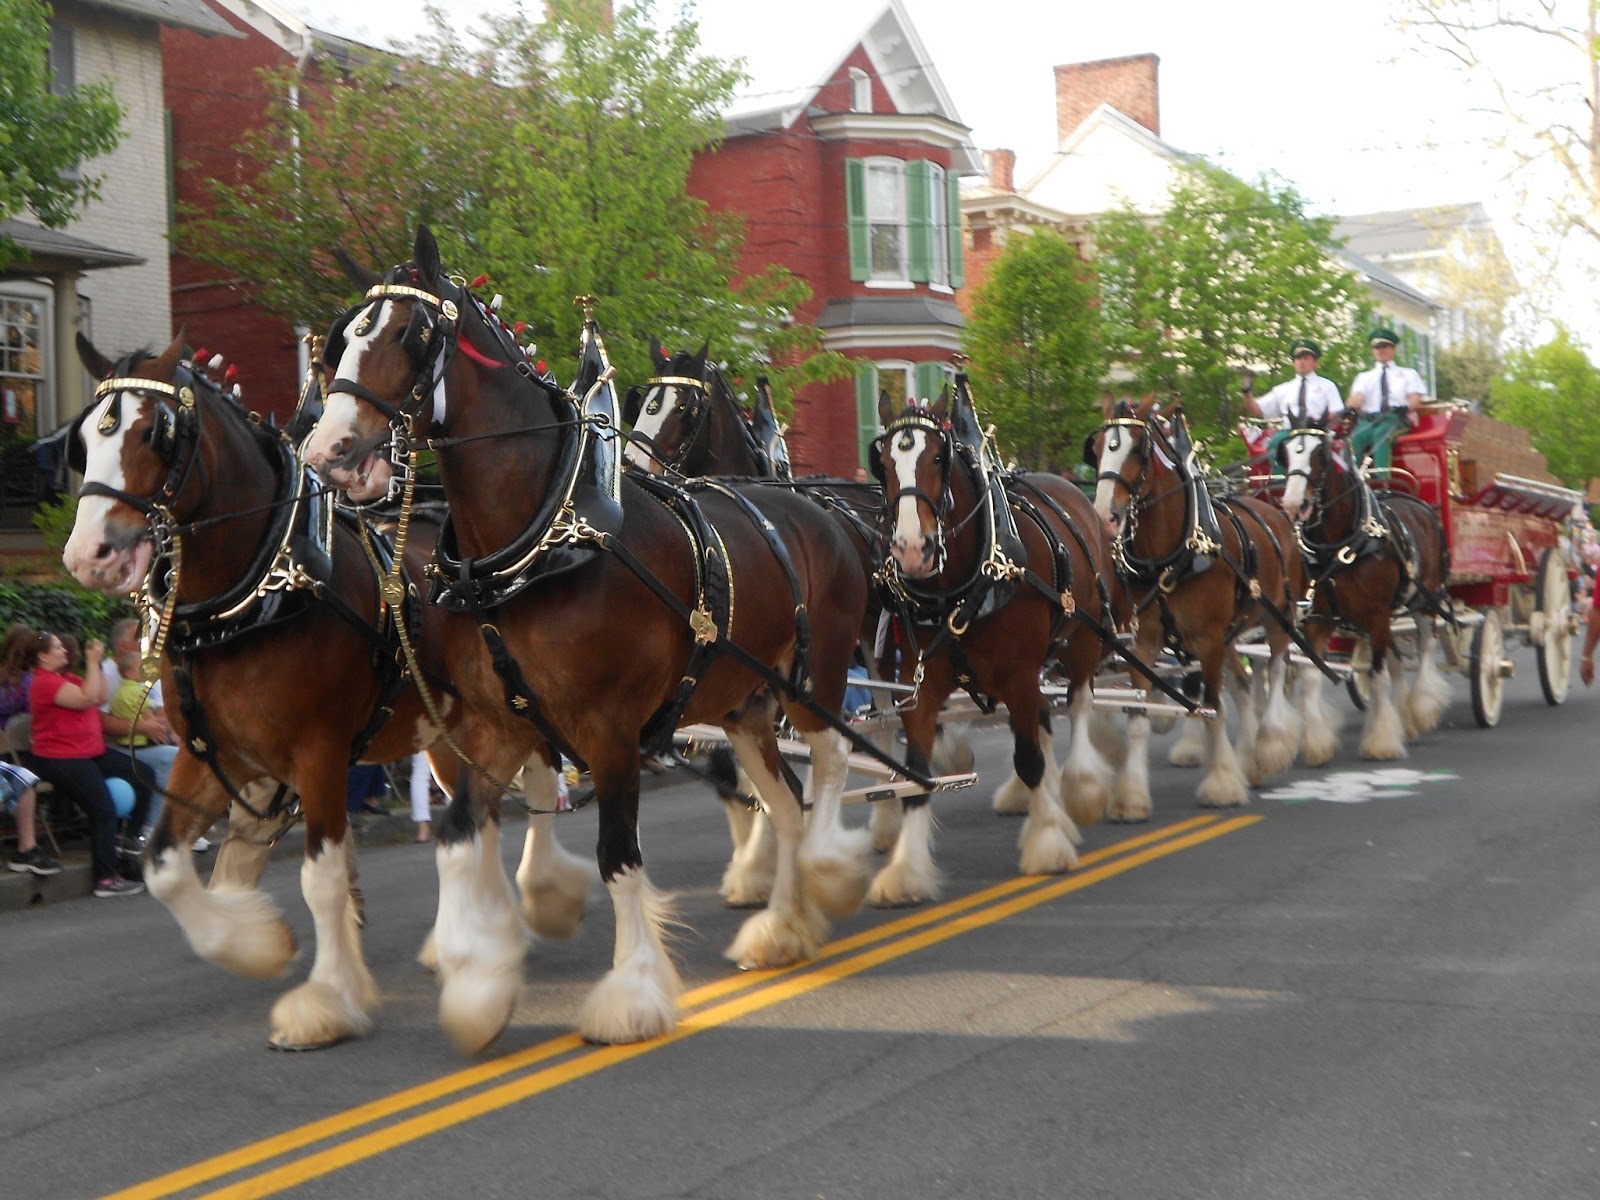 Budweiser Clydesdale Wallpaper Images Pictures   Becuo